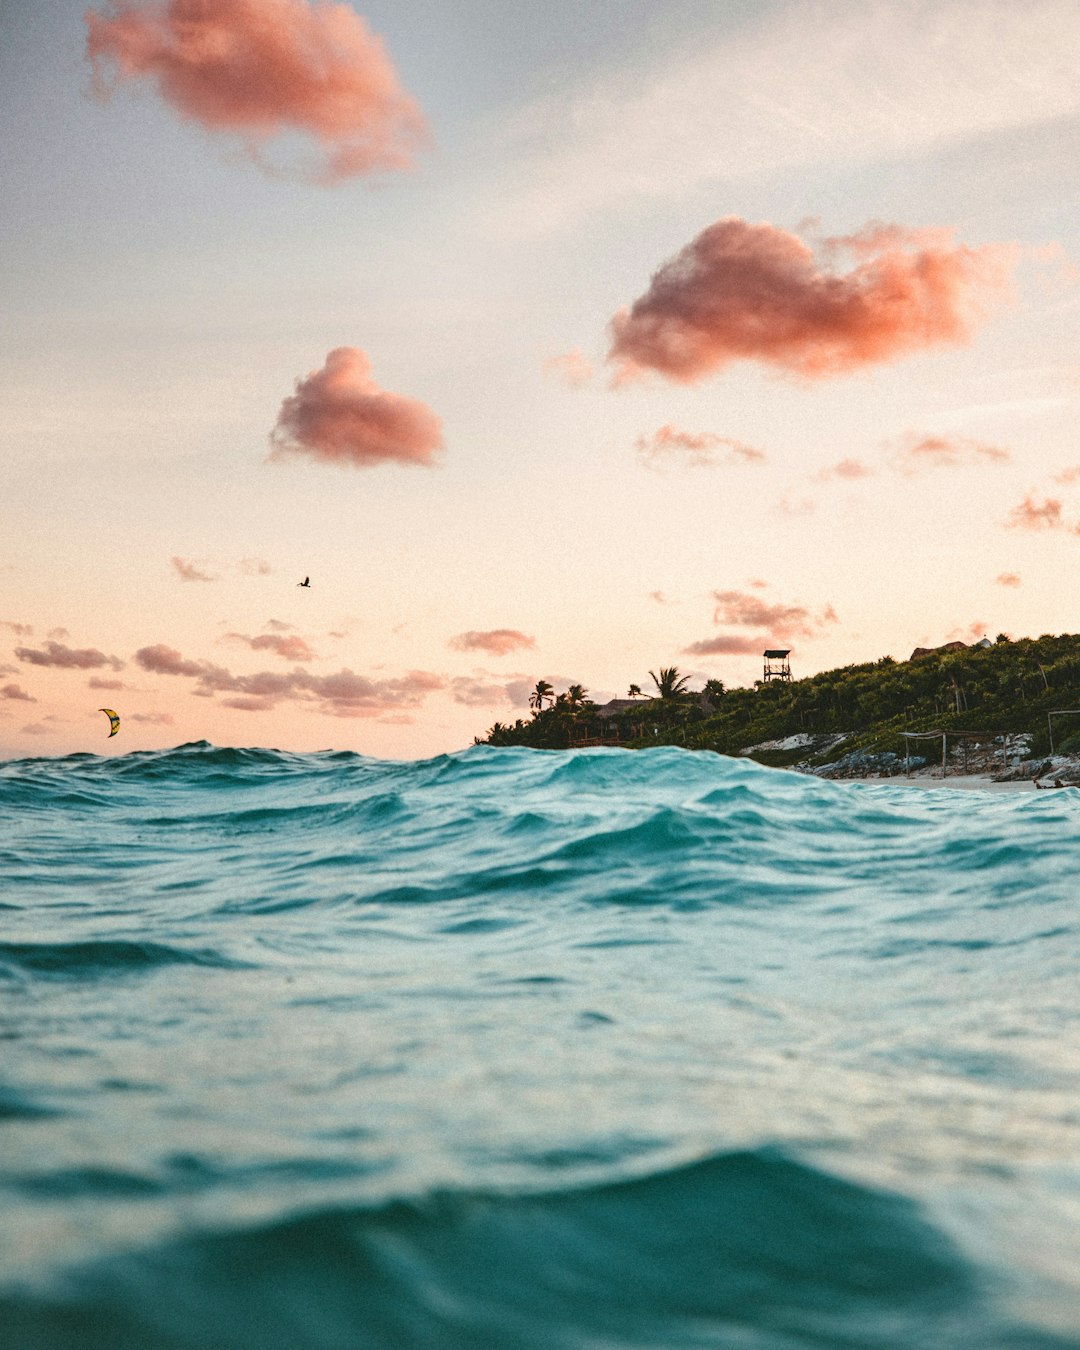 photograph of the sea in Tulum, Mexico with pink clouds and kitesurfers on it, shot from inside an ocean wave looking towards a tropical island with buildings, shot at golden hour, beautiful sky, taken in the style of Sony Alpha A7 III camera with f/8 aperture setting, 35mm focal length lenses, natural light, soft focus, bokeh effect, minimalistic, neutral color tones, no contrasty colors, calming effect, –ar 51:64